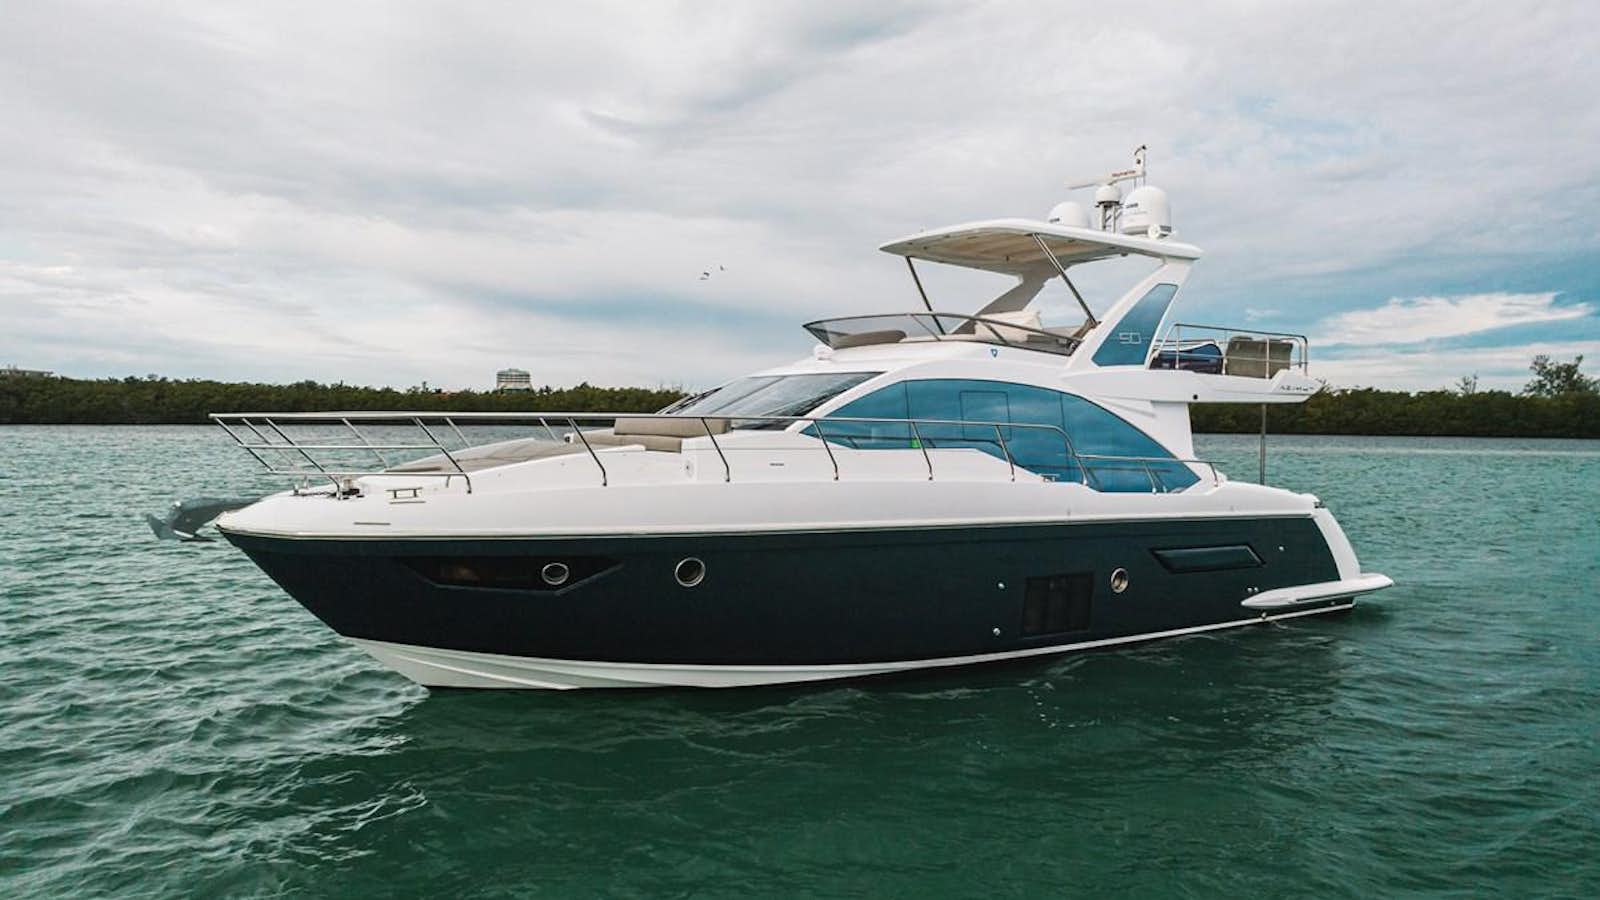 Sea forever
Yacht for Sale